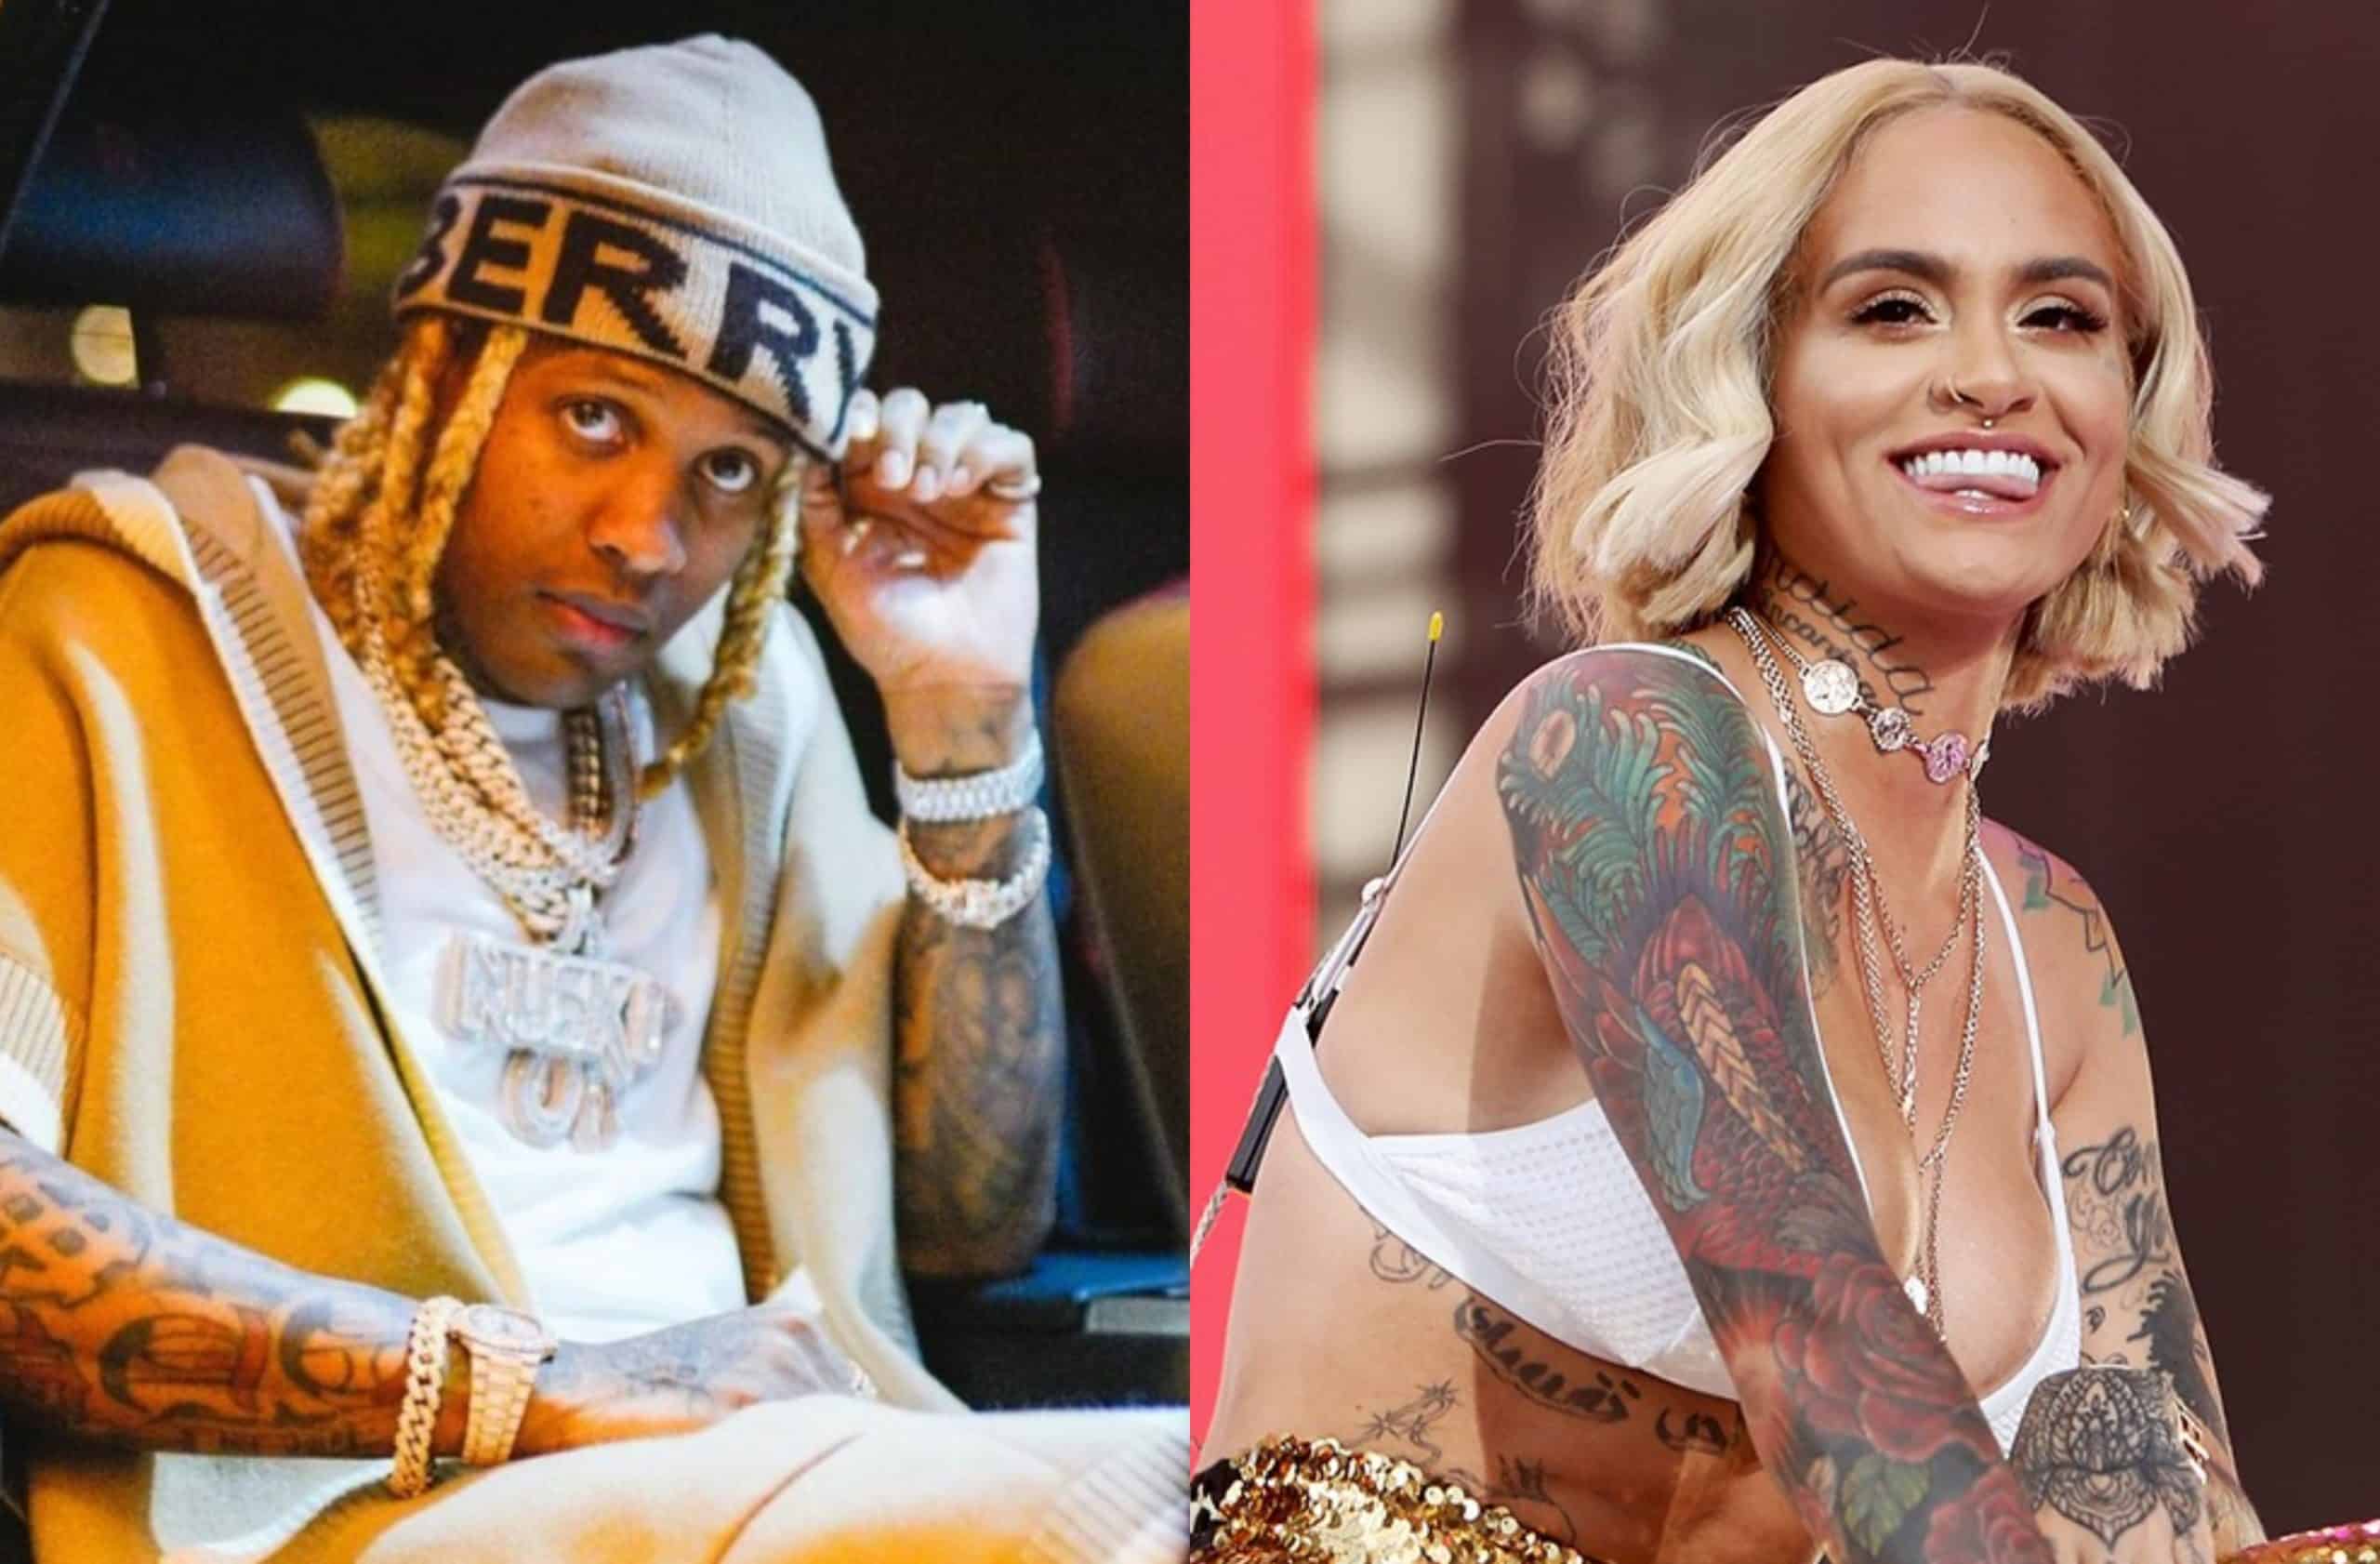 New Music Lil Durk - Love You Too (Feat. Kehlani)